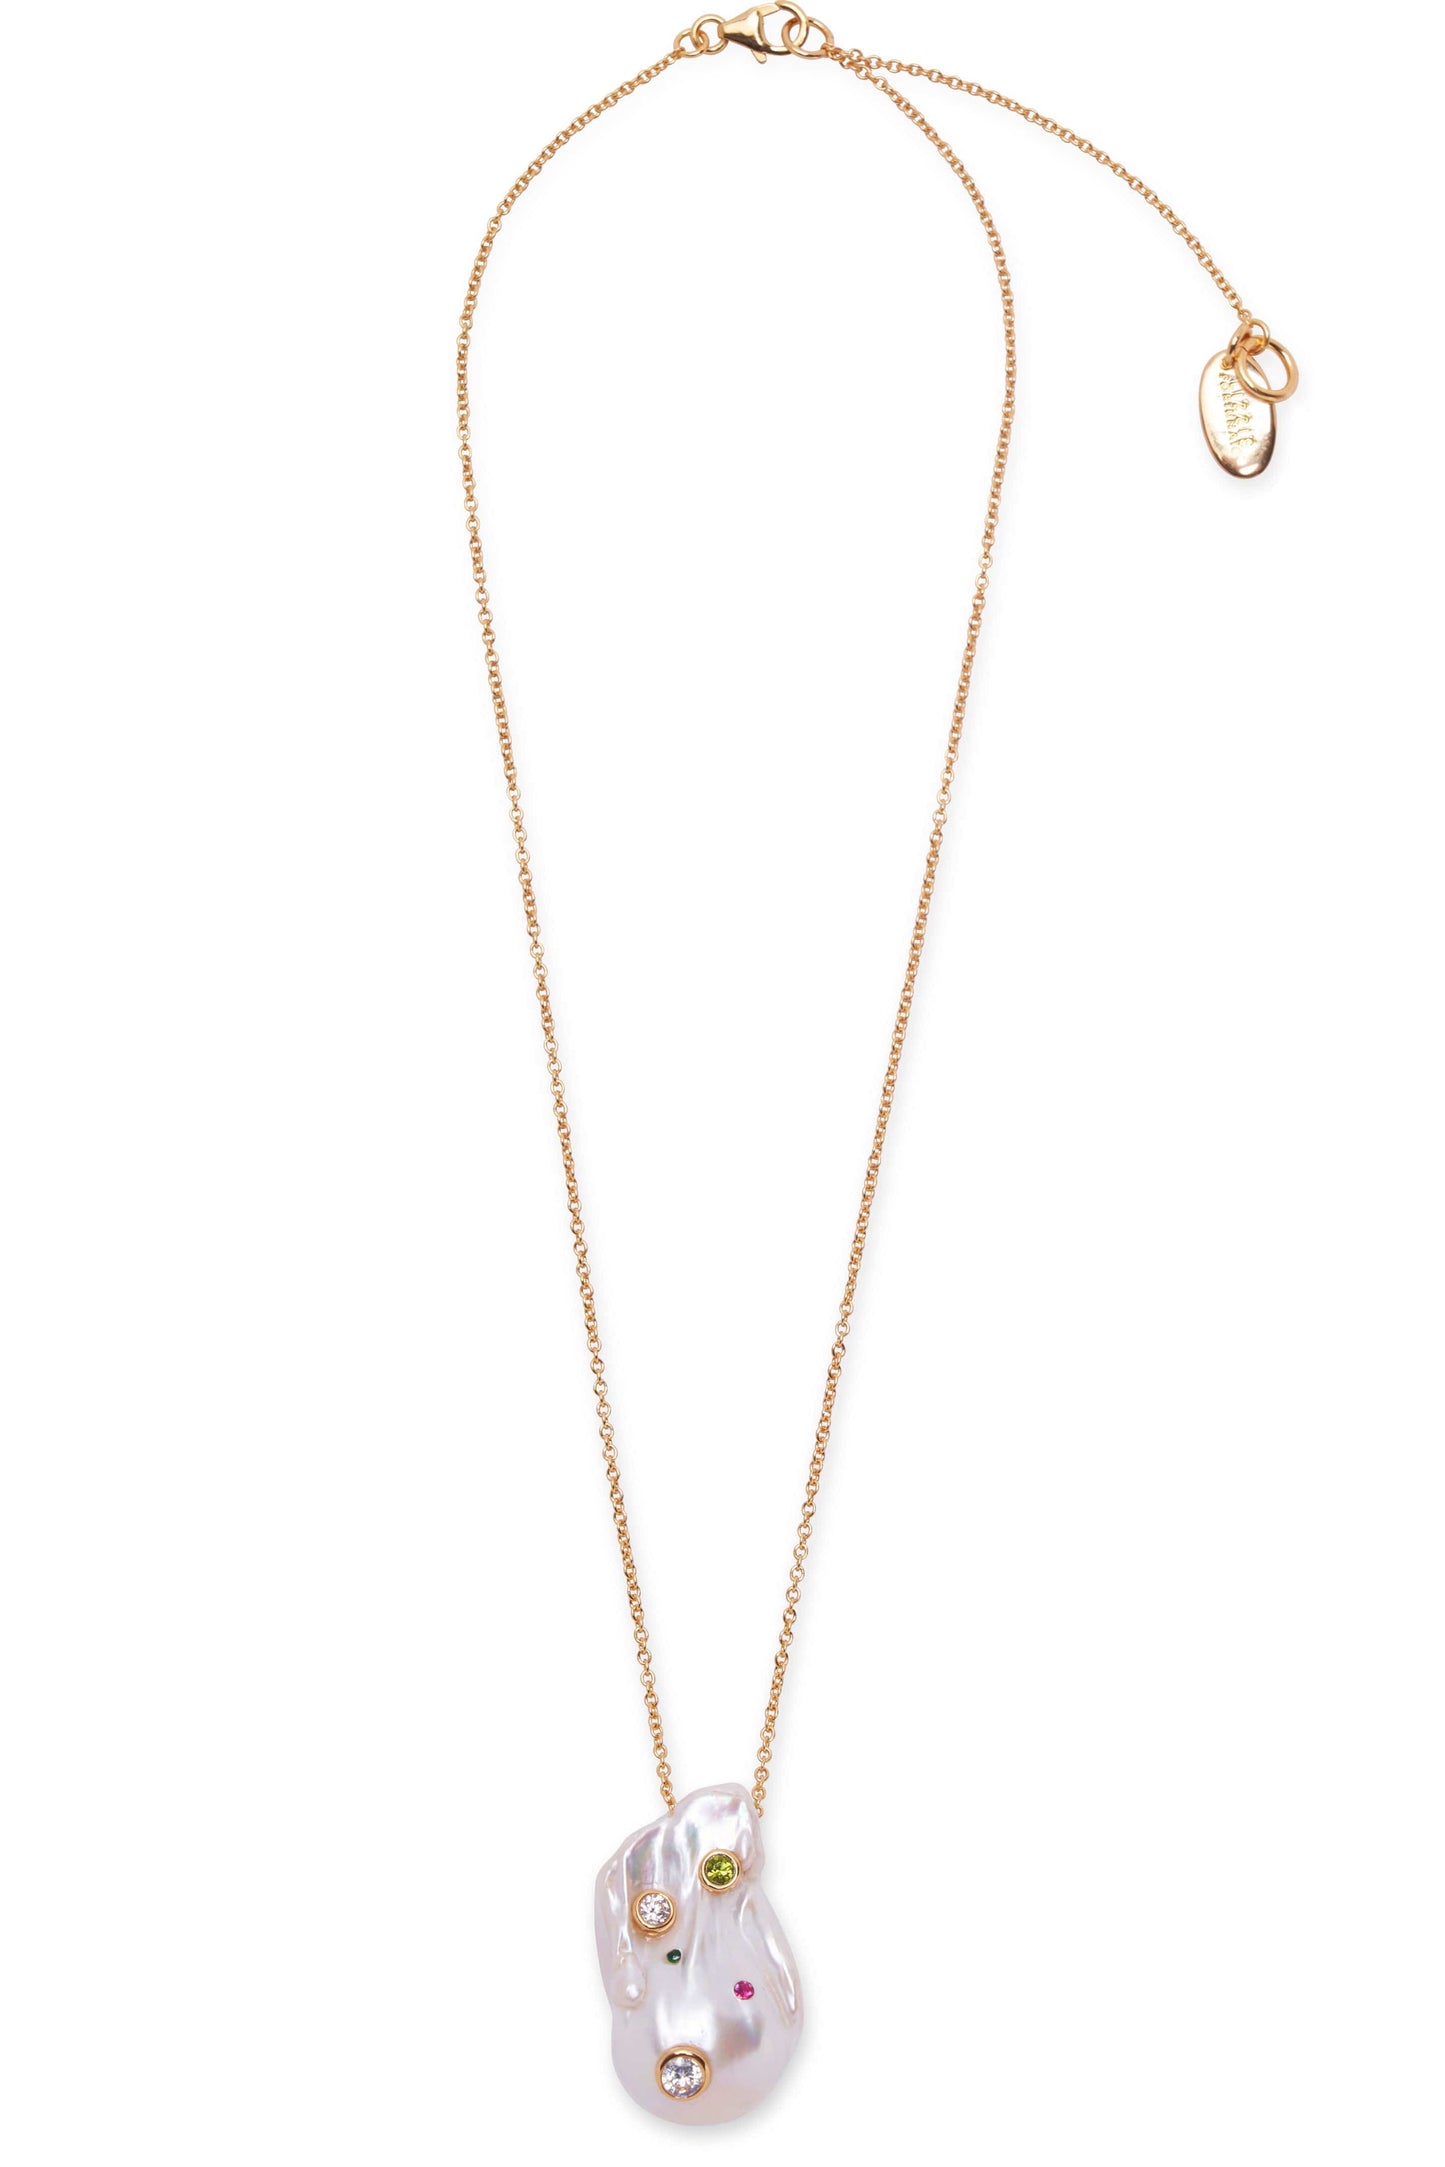 LIZZIE FORTUNATO-Rainbow Pearl Oasis Necklace-PEARL